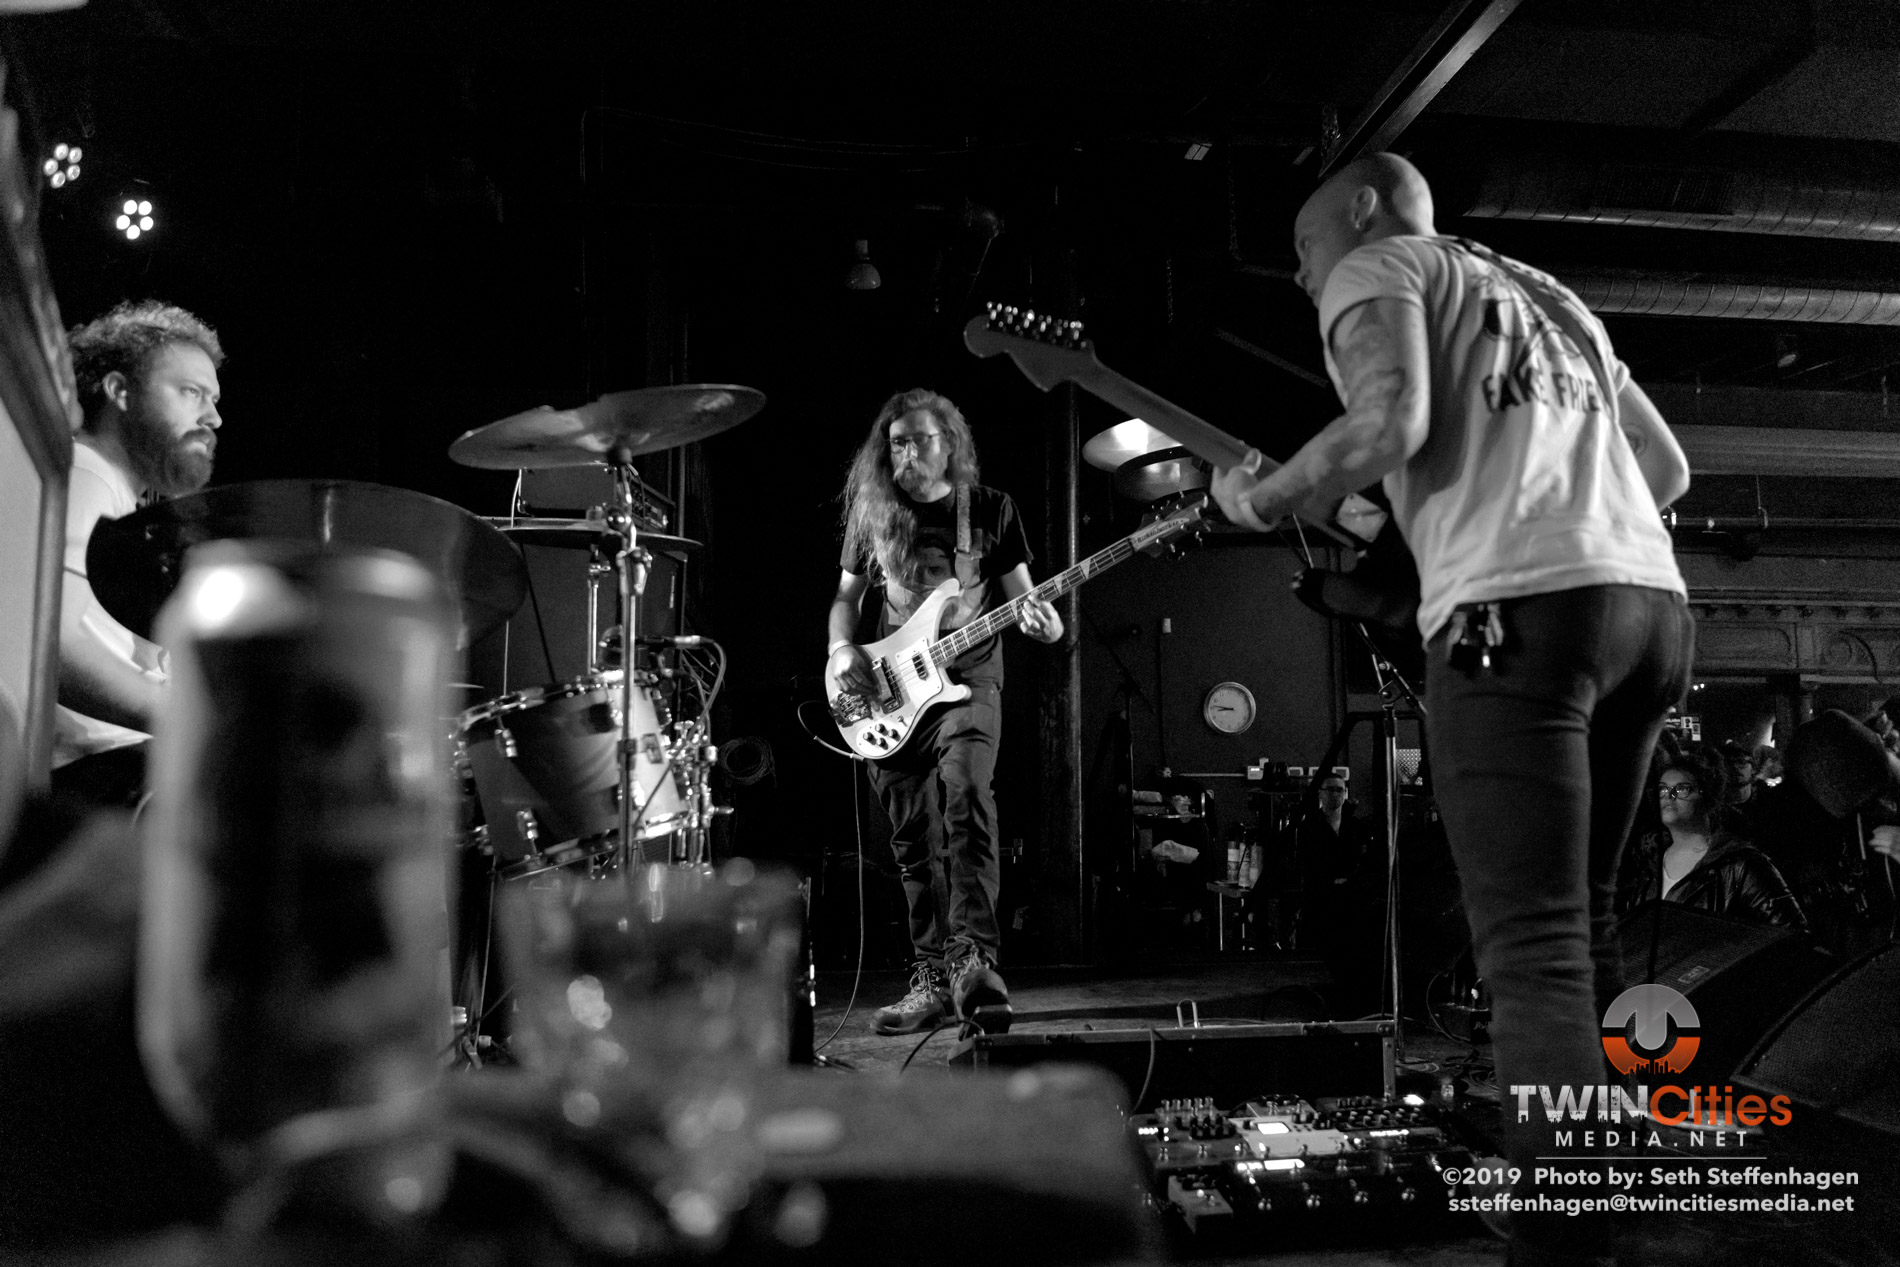 March 27, 2019 - Saint Paul, Minnesota, United States - Grogus live in concert at the Turf Club opening for Thou and Emma Ruth Rundle.

(Photo by Seth Steffenhagen/Steffenhagen Photography)